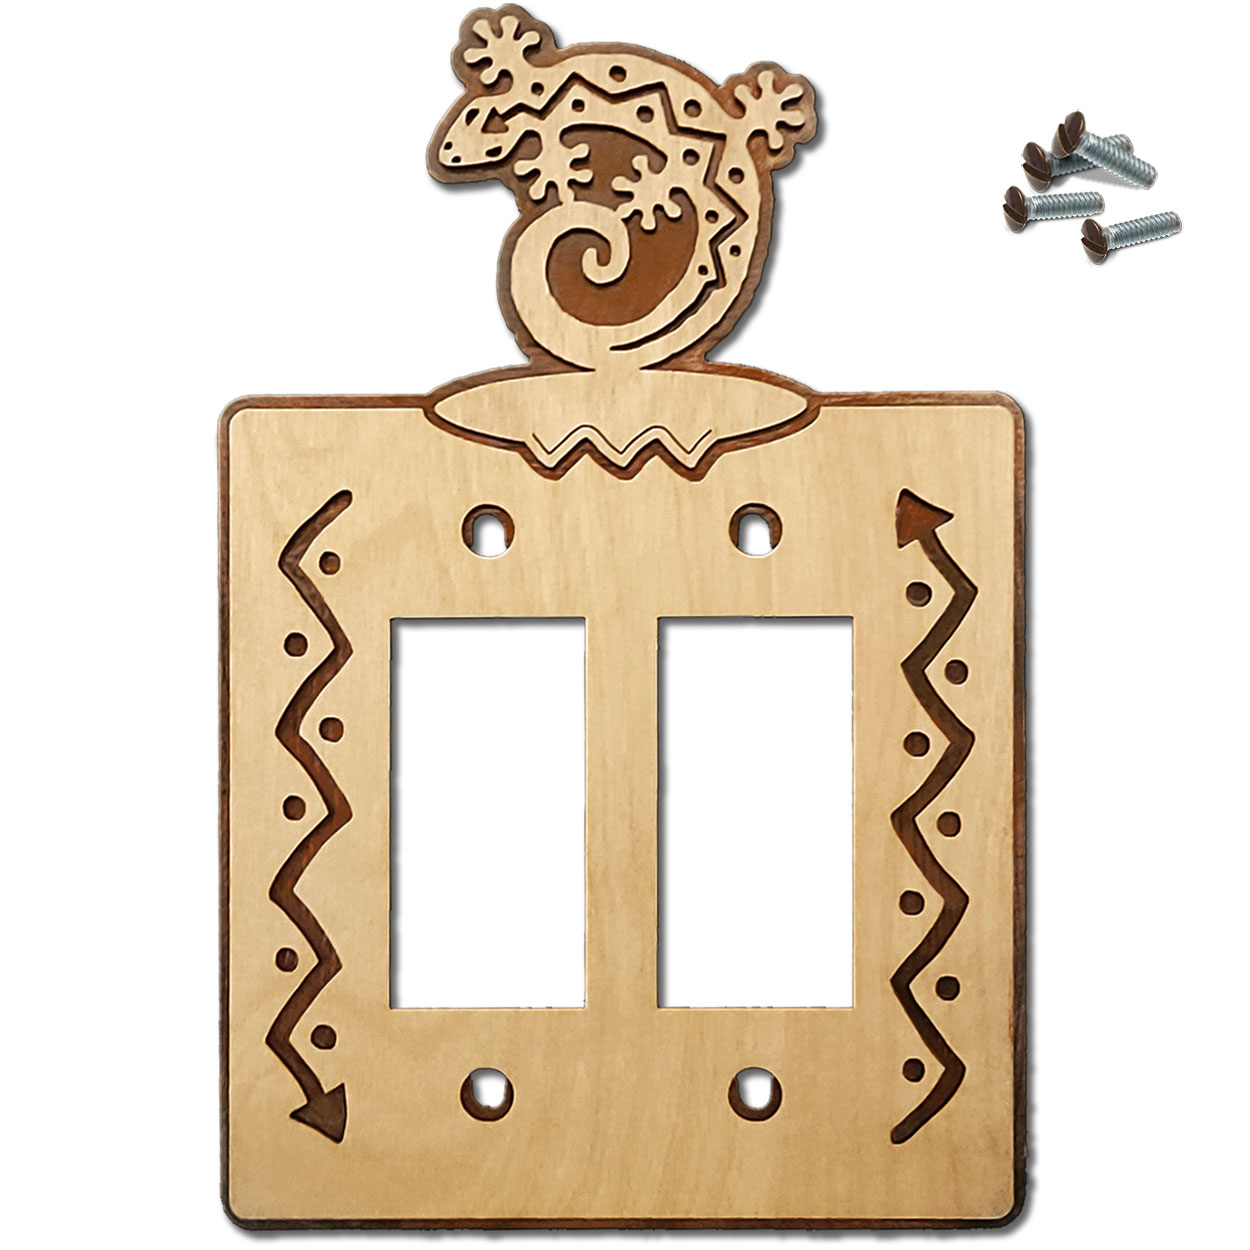 167912R -  Curled Gecko Southwestern Decor Double Rocker Switch Plate in Natural Birch